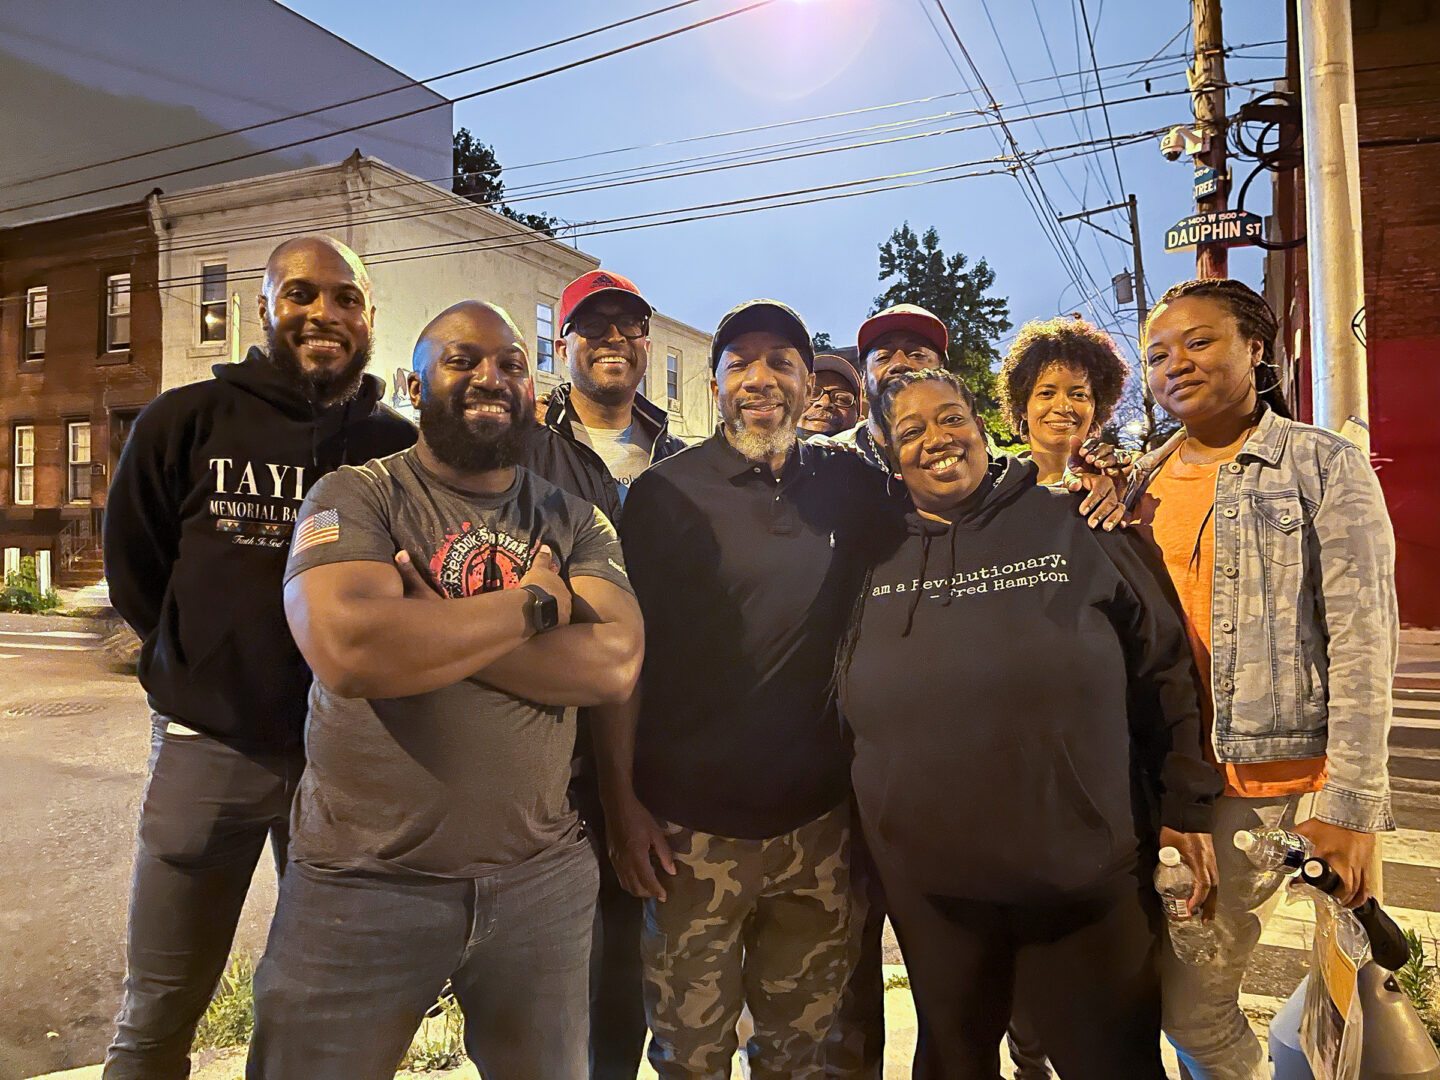 Volunteers with Corners to Connections gather after a night of street outreach. The faith-based coalition patrolled every night in June and is continuing throughout August. From left to right (back row): G Lamar Stewart, Morgan Wilson, Joe Massengale, Mark Christian, Sonya Umble, Tirzah Cannad From left to right (front row): Jeffrey Browne, Julius Renwick Aliya Bradley 